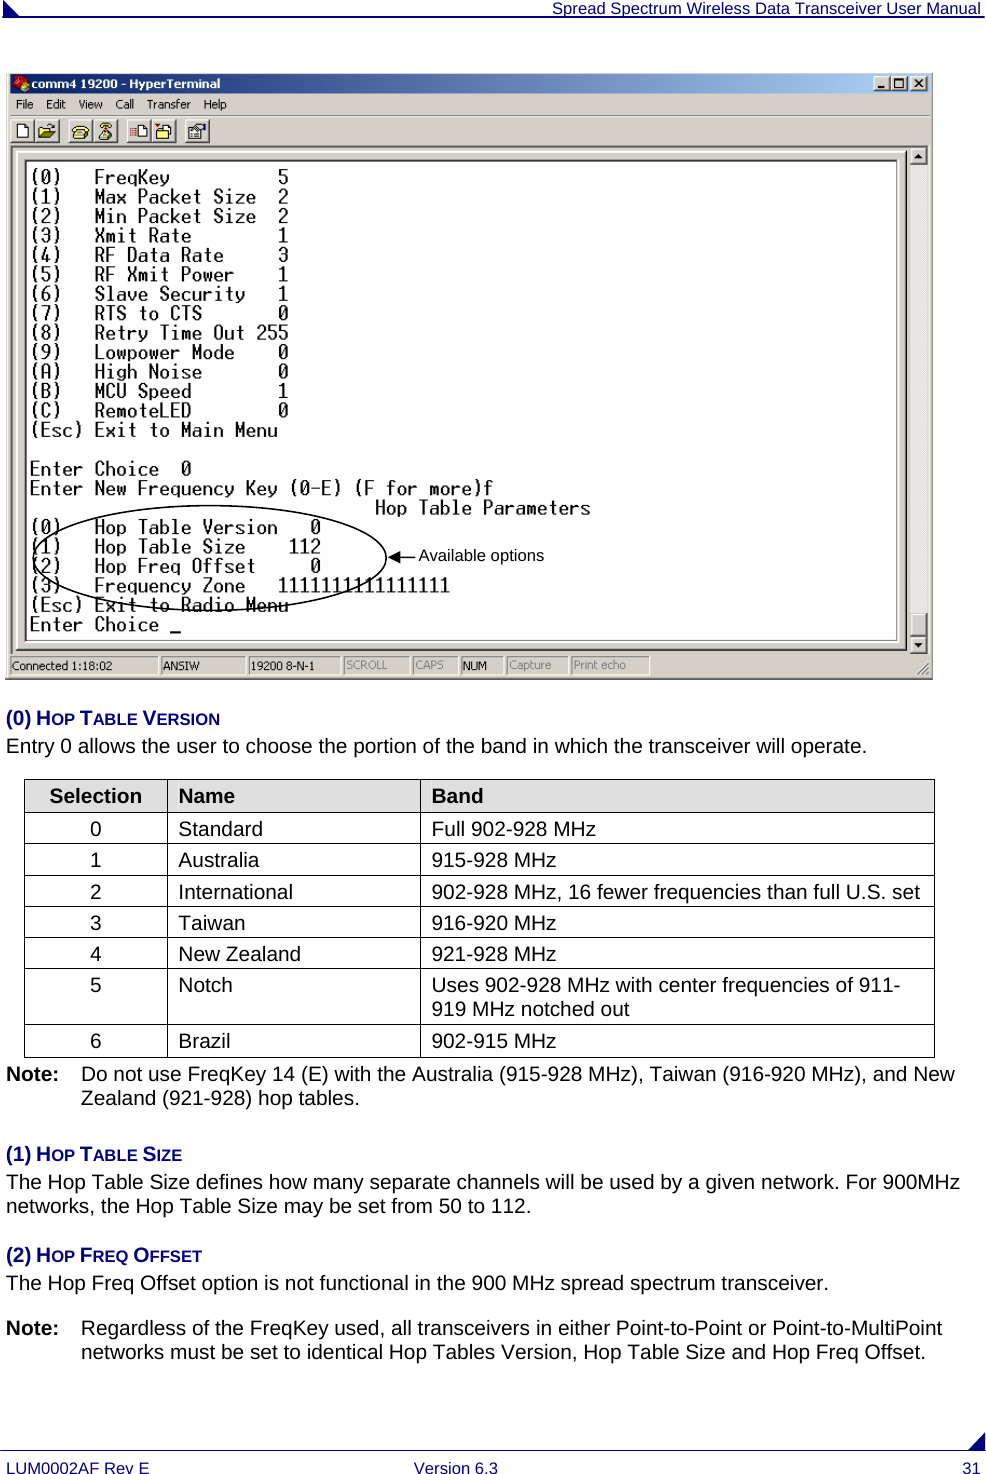  Spread Spectrum Wireless Data Transceiver User Manual LUM0002AF Rev E  Version 6.3  31  (0) HOP TABLE VERSION Entry 0 allows the user to choose the portion of the band in which the transceiver will operate.  Selection  Name  Band 0  Standard  Full 902-928 MHz 1 Australia  915-928 MHz 2  International  902-928 MHz, 16 fewer frequencies than full U.S. set 3 Taiwan  916-920 MHz 4  New Zealand  921-928 MHz 5  Notch  Uses 902-928 MHz with center frequencies of 911-919 MHz notched out 6 Brazil  902-915 MHz Note:  Do not use FreqKey 14 (E) with the Australia (915-928 MHz), Taiwan (916-920 MHz), and New Zealand (921-928) hop tables.  (1) HOP TABLE SIZE The Hop Table Size defines how many separate channels will be used by a given network. For 900MHz networks, the Hop Table Size may be set from 50 to 112.  (2) HOP FREQ OFFSET The Hop Freq Offset option is not functional in the 900 MHz spread spectrum transceiver.  Note:  Regardless of the FreqKey used, all transceivers in either Point-to-Point or Point-to-MultiPoint networks must be set to identical Hop Tables Version, Hop Table Size and Hop Freq Offset.  Available options 